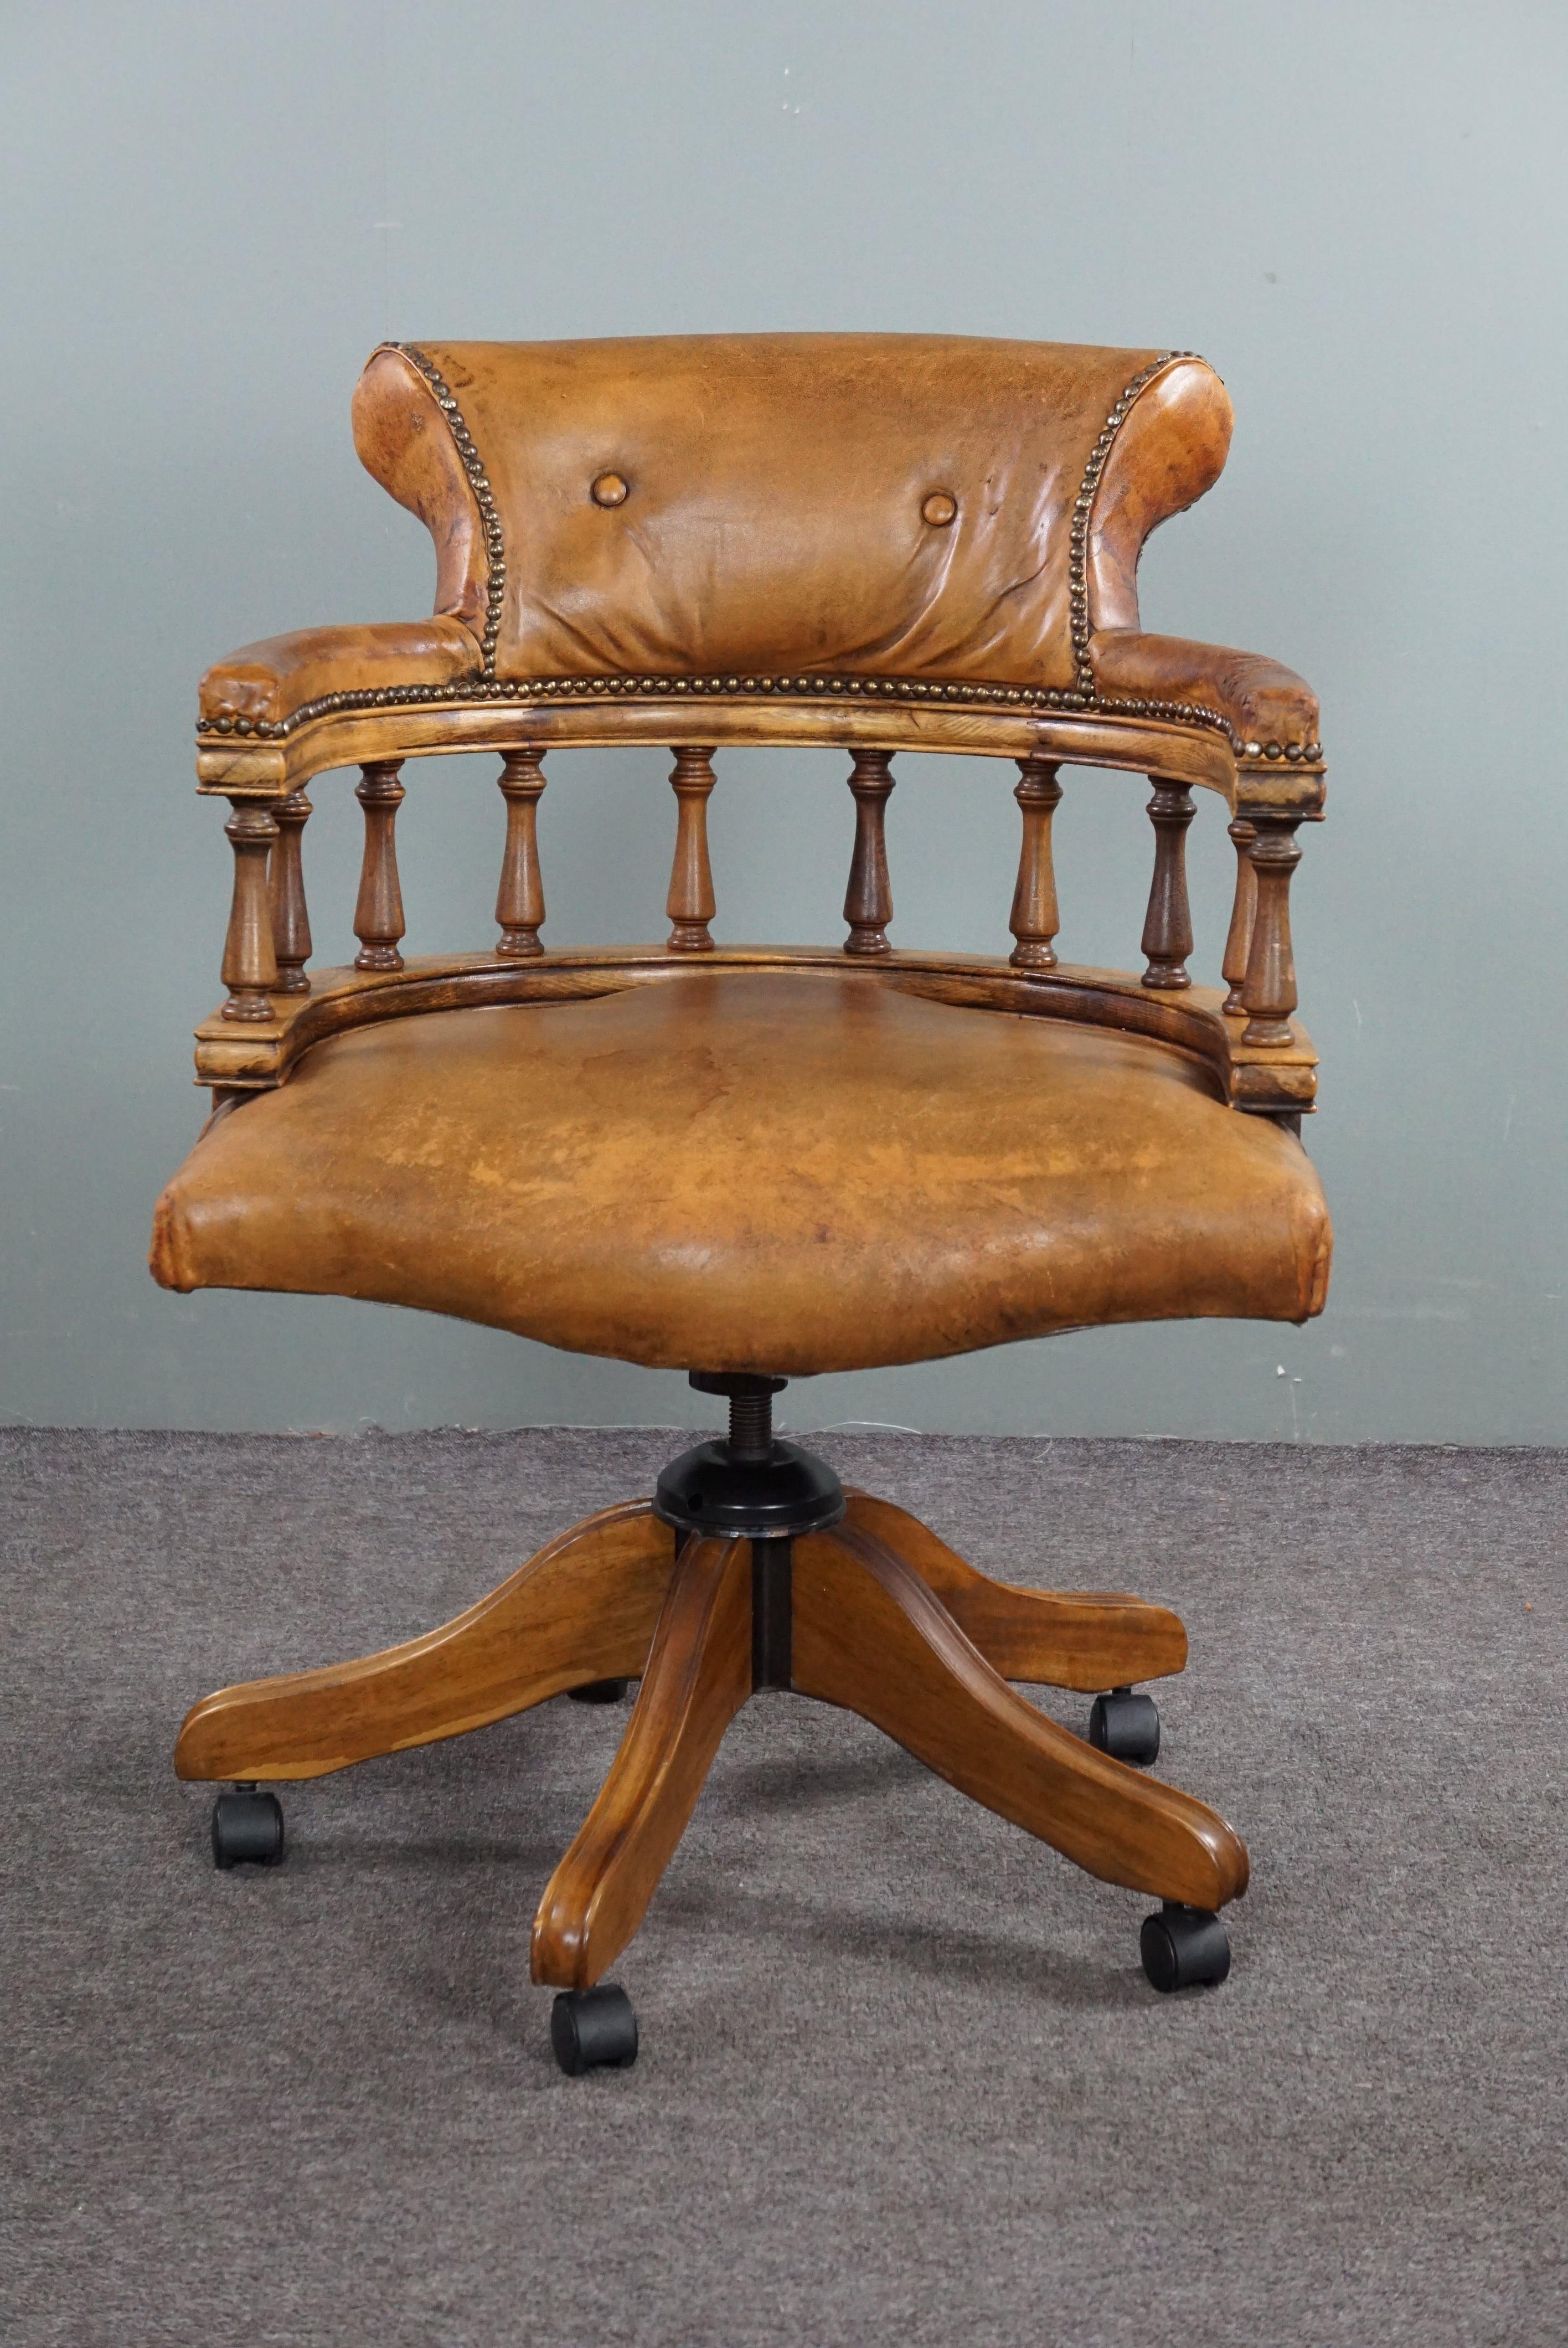 Offered this elegant Captains Chair is both height-adjustable and tiltable.

This beautiful Captains Chair is a real eye-catcher at your desk thanks to its decorative nails and warm-colored wood. This office chair, in English Chesterfield style, is